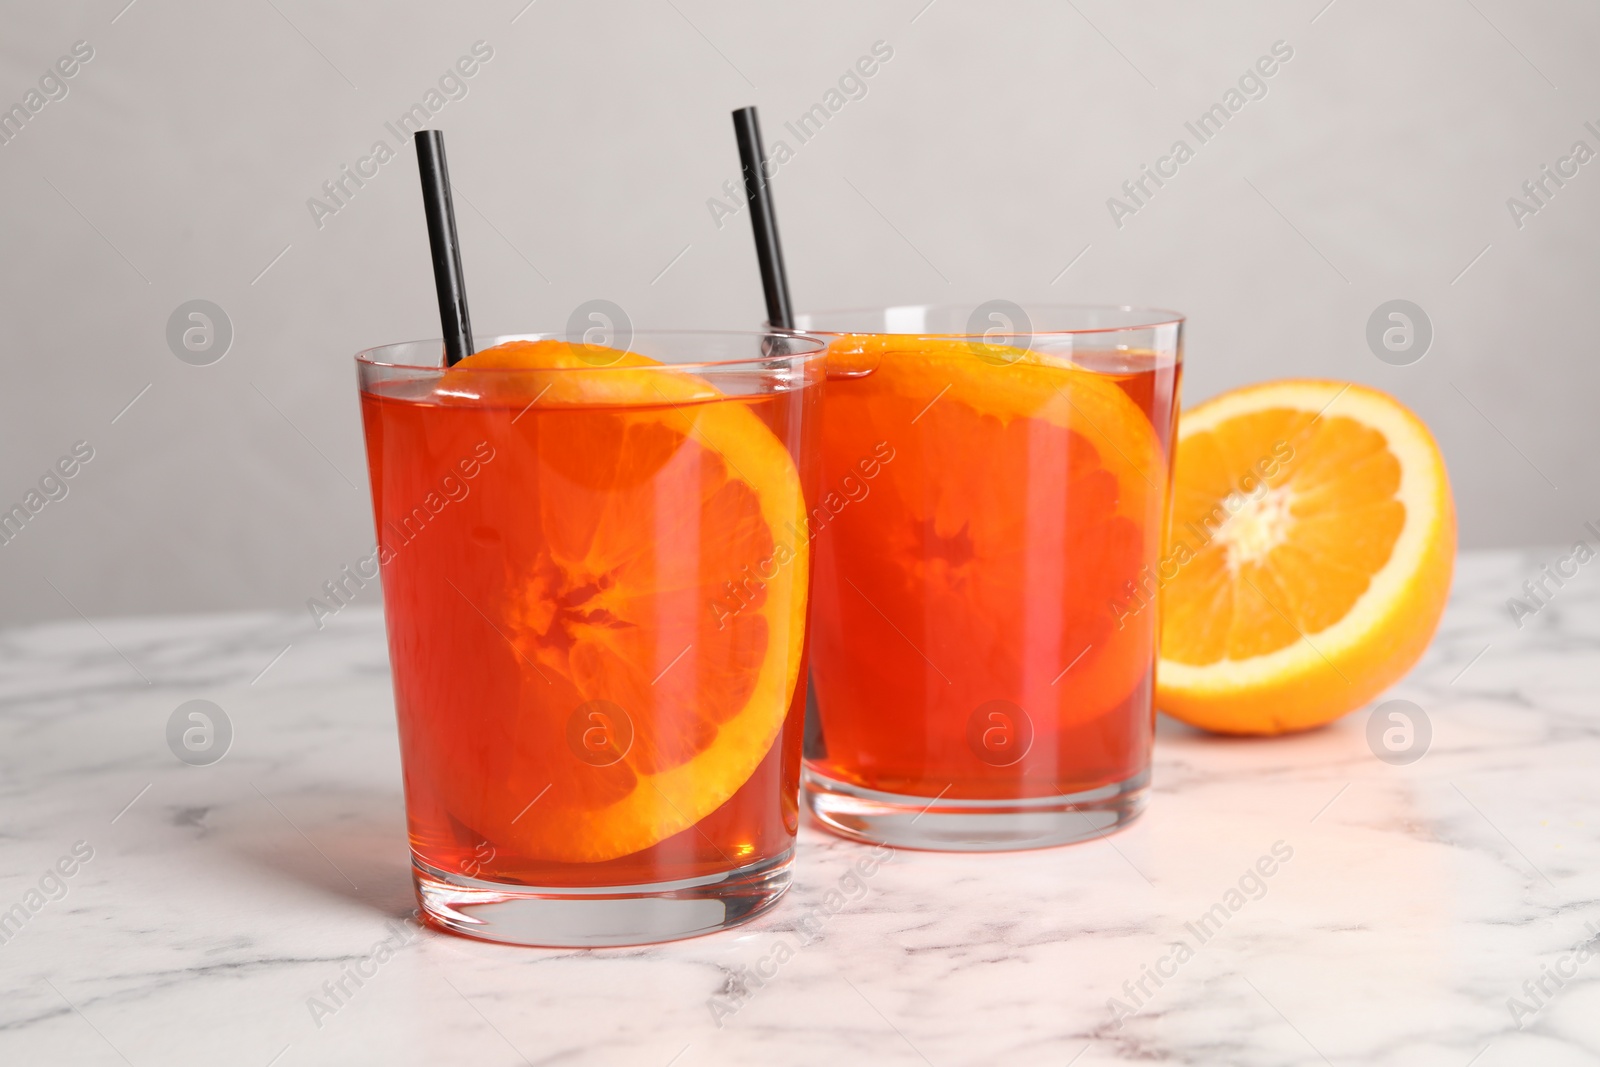 Photo of Aperol spritz cocktail, orange slices and straws in glasses on white marble table